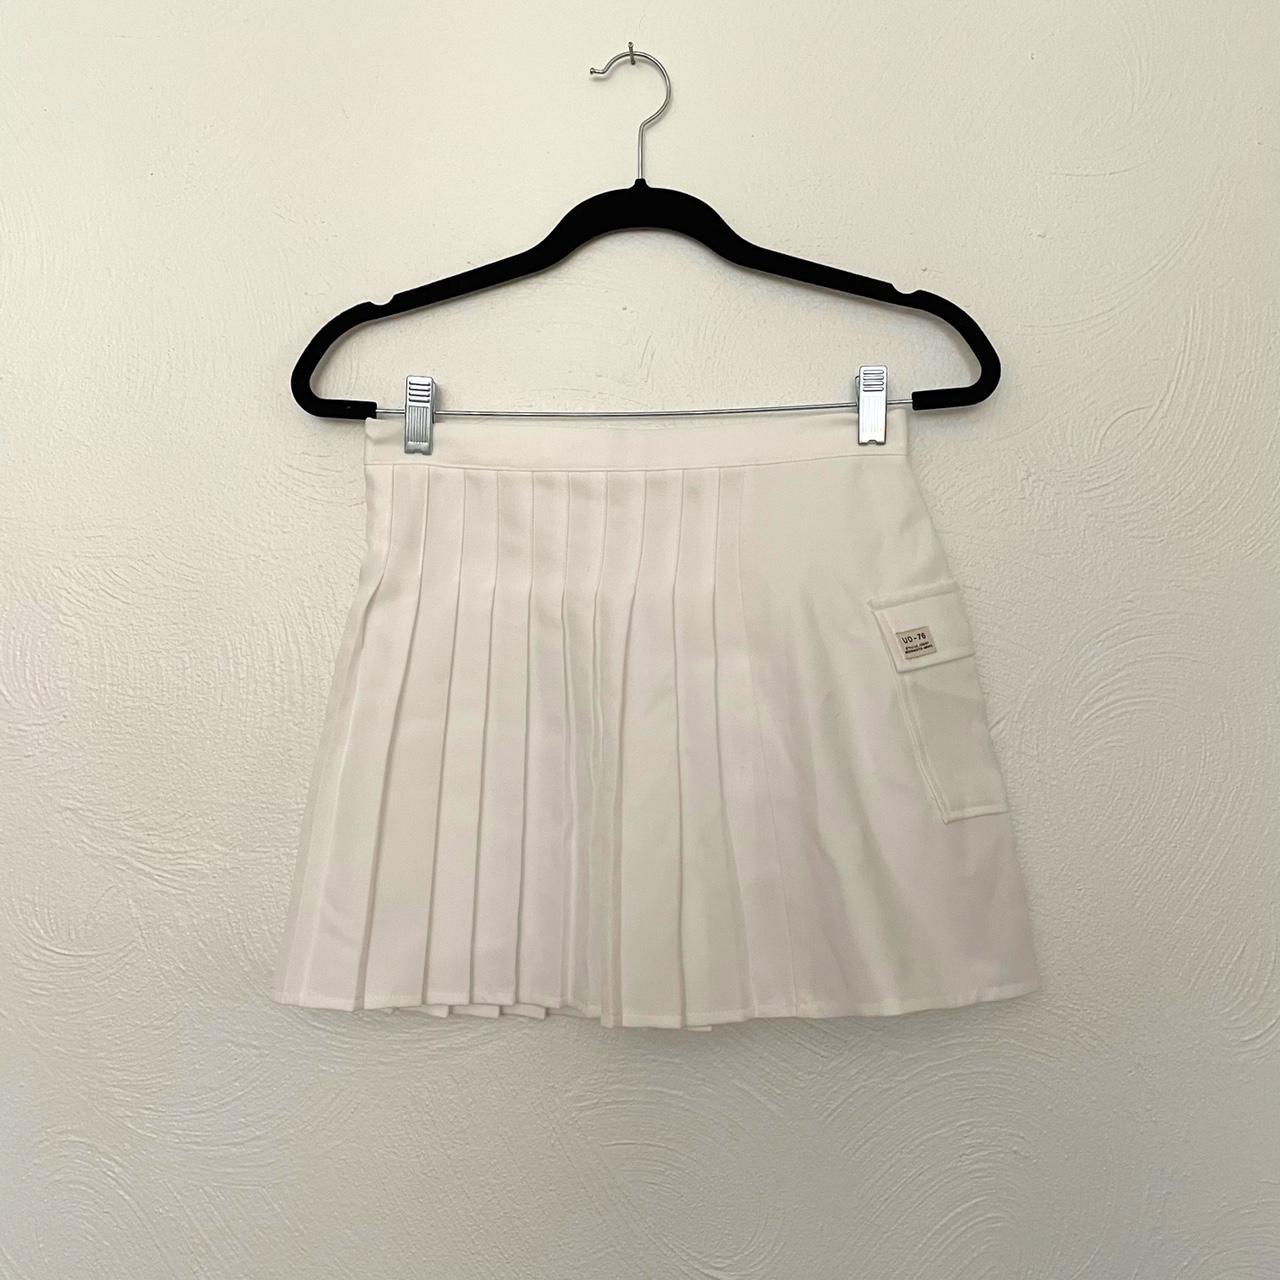 Product Image 2 - Urban Outfitters tennis skirt!

pleated with